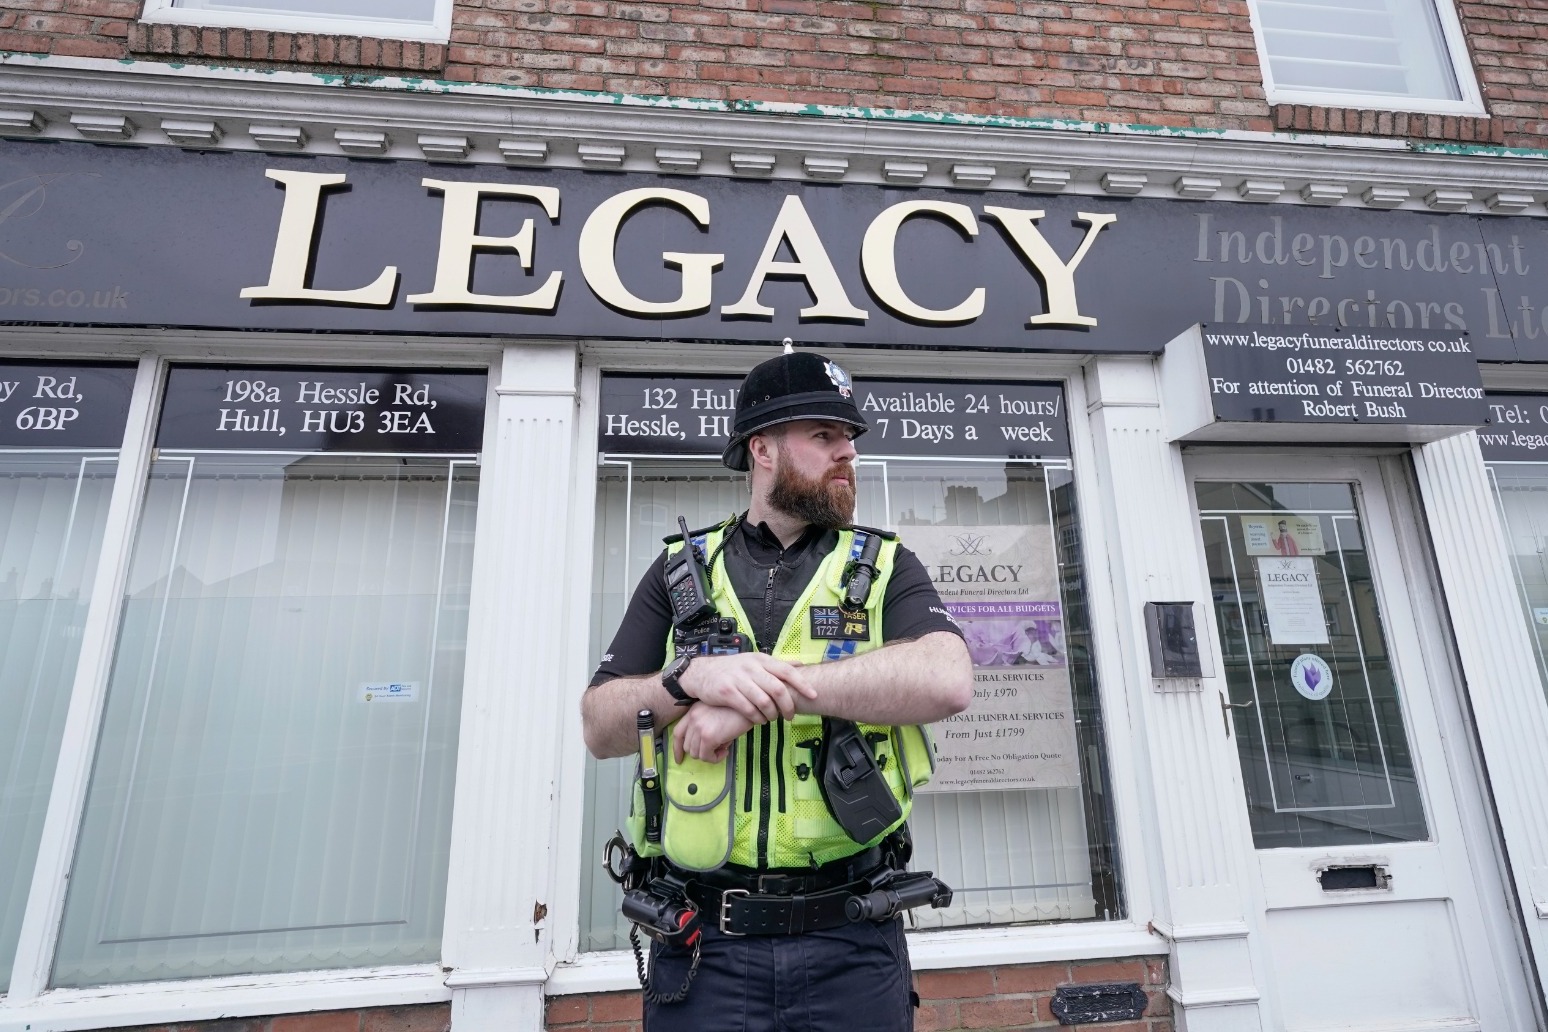 Bodies and suspected ashes recovered from funeral directors 